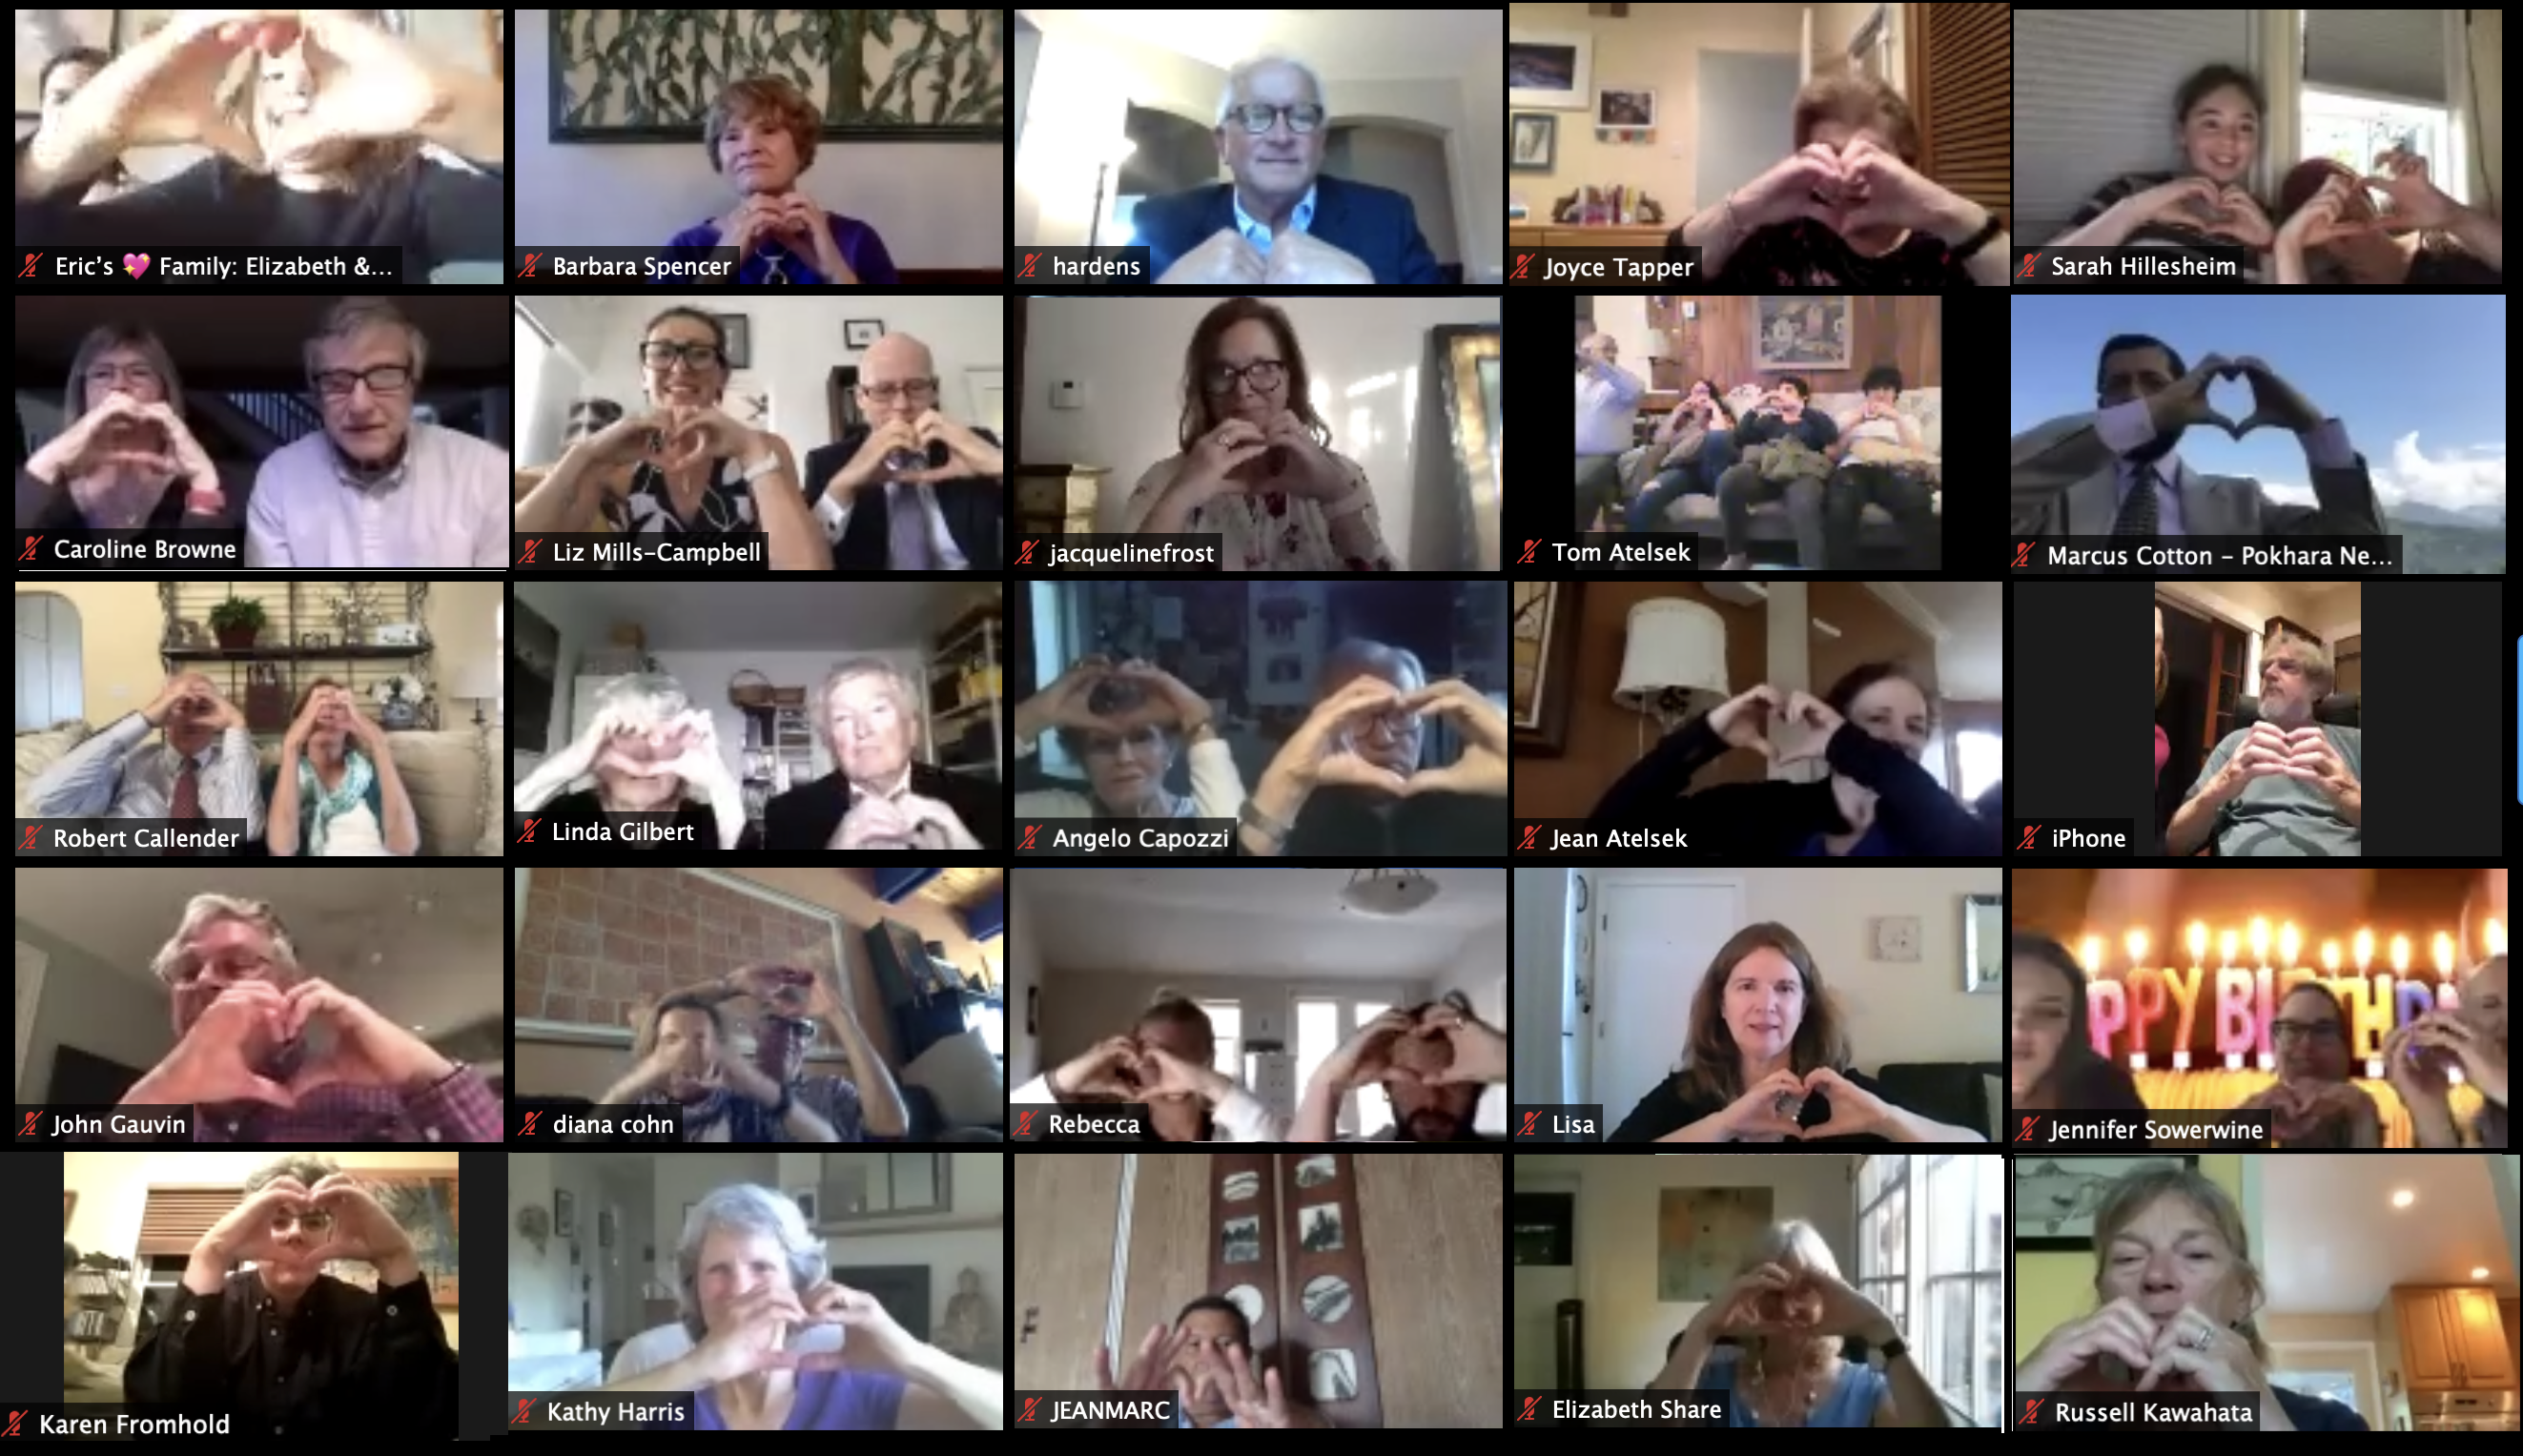 Founder's Day participants around the world share an onscreen #LoveWorks moment by shaping their hands in the shape of a heart.